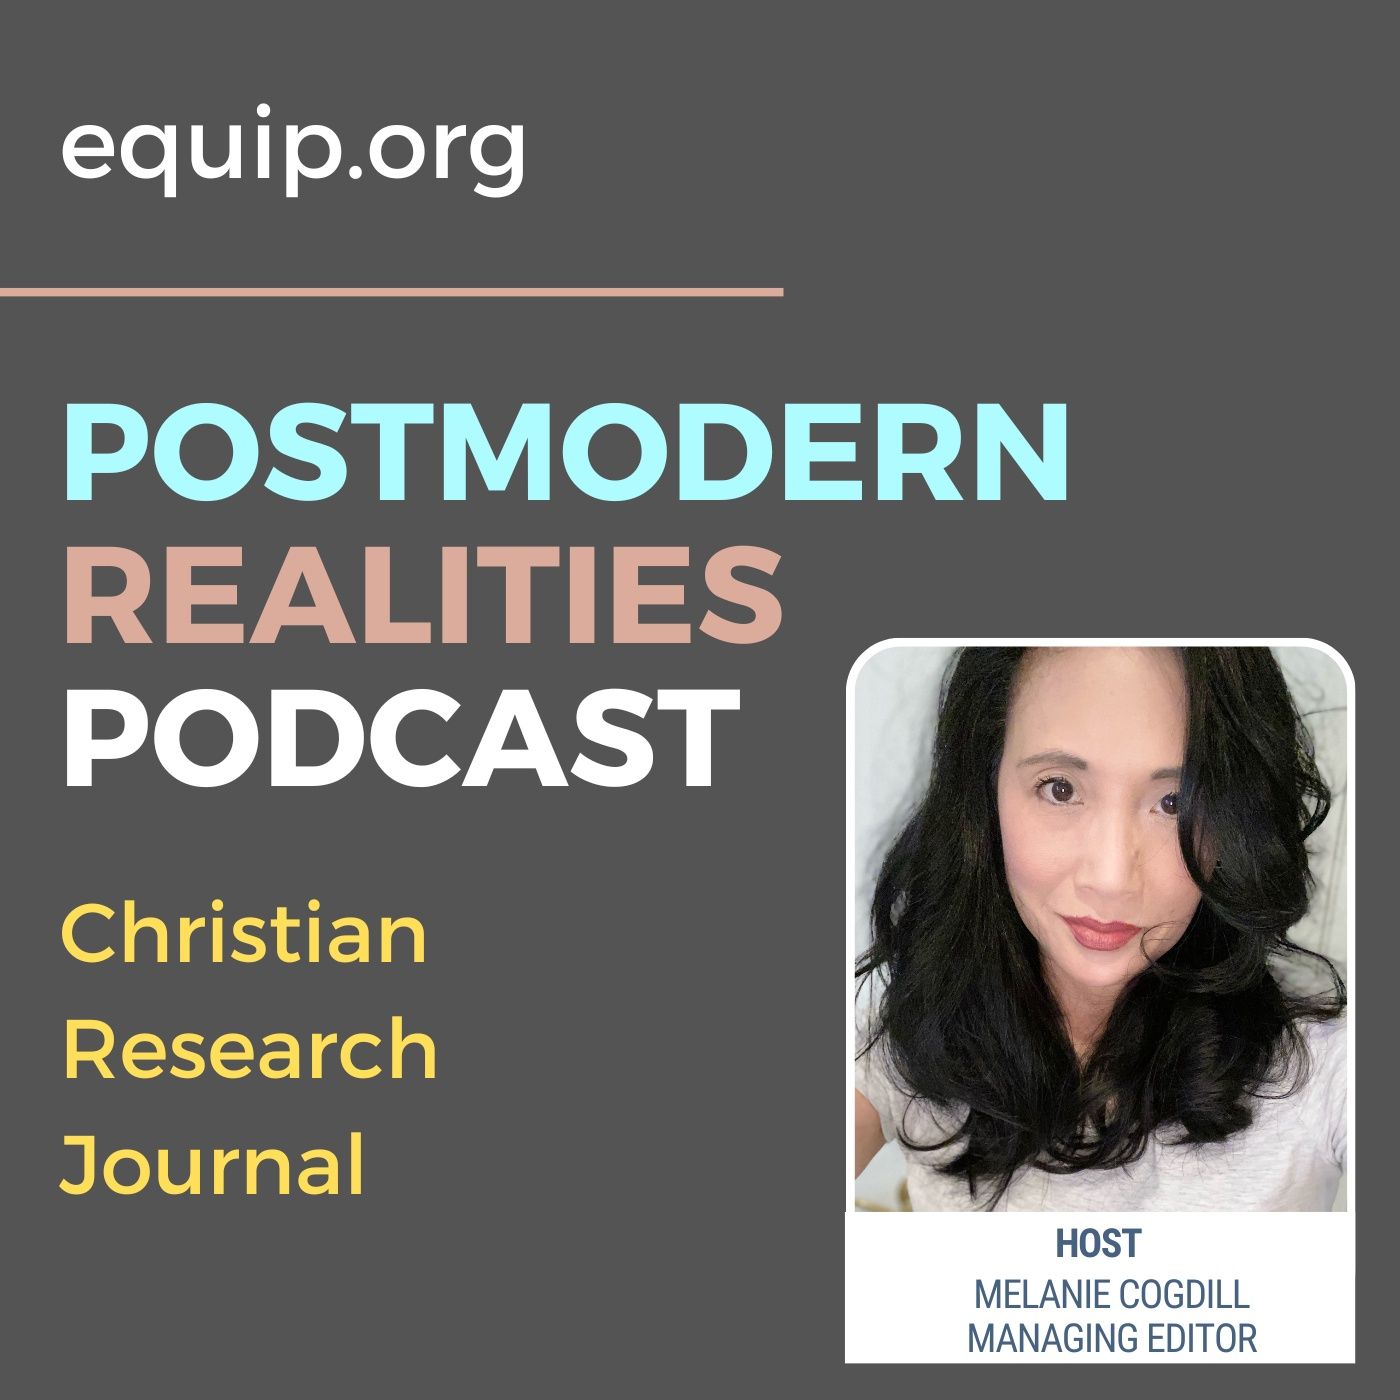 Postmodern Realities Episode 394 Marketing An “Almost” Jesus—Evaluating The “He Gets Us” Campaign